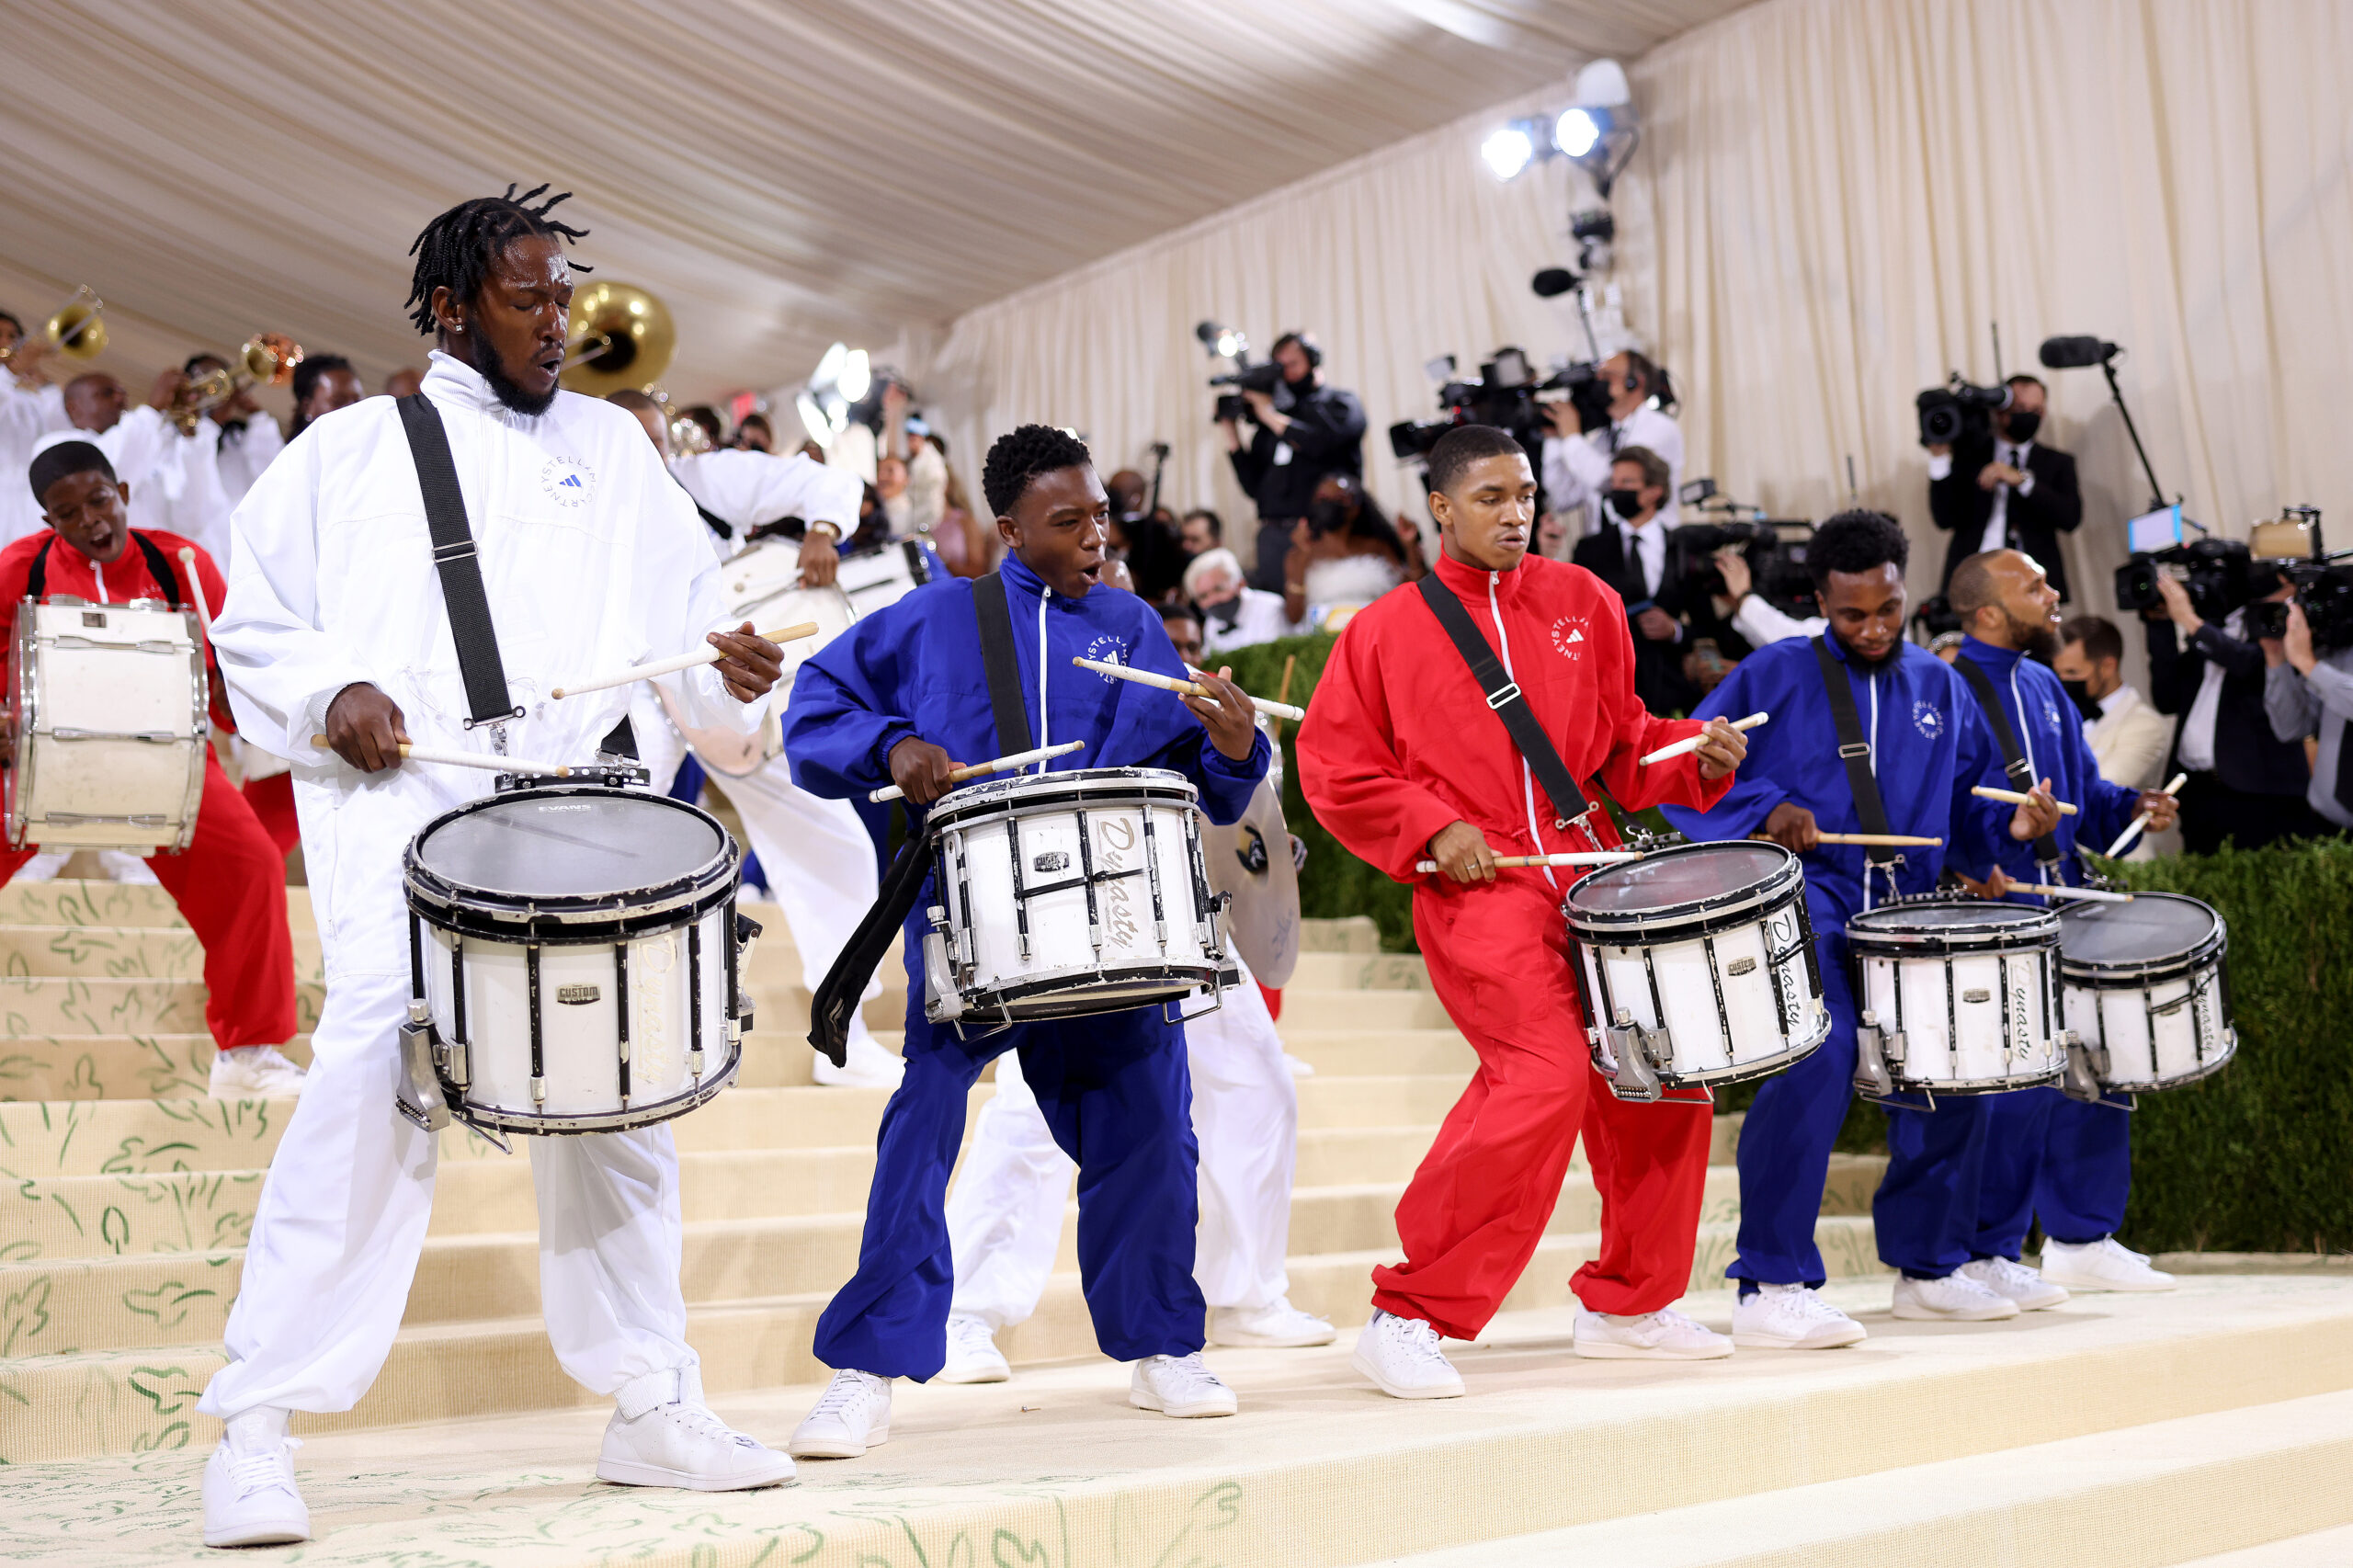 The Brooklyn United Marching Band Performed At The 2021 MET Gala